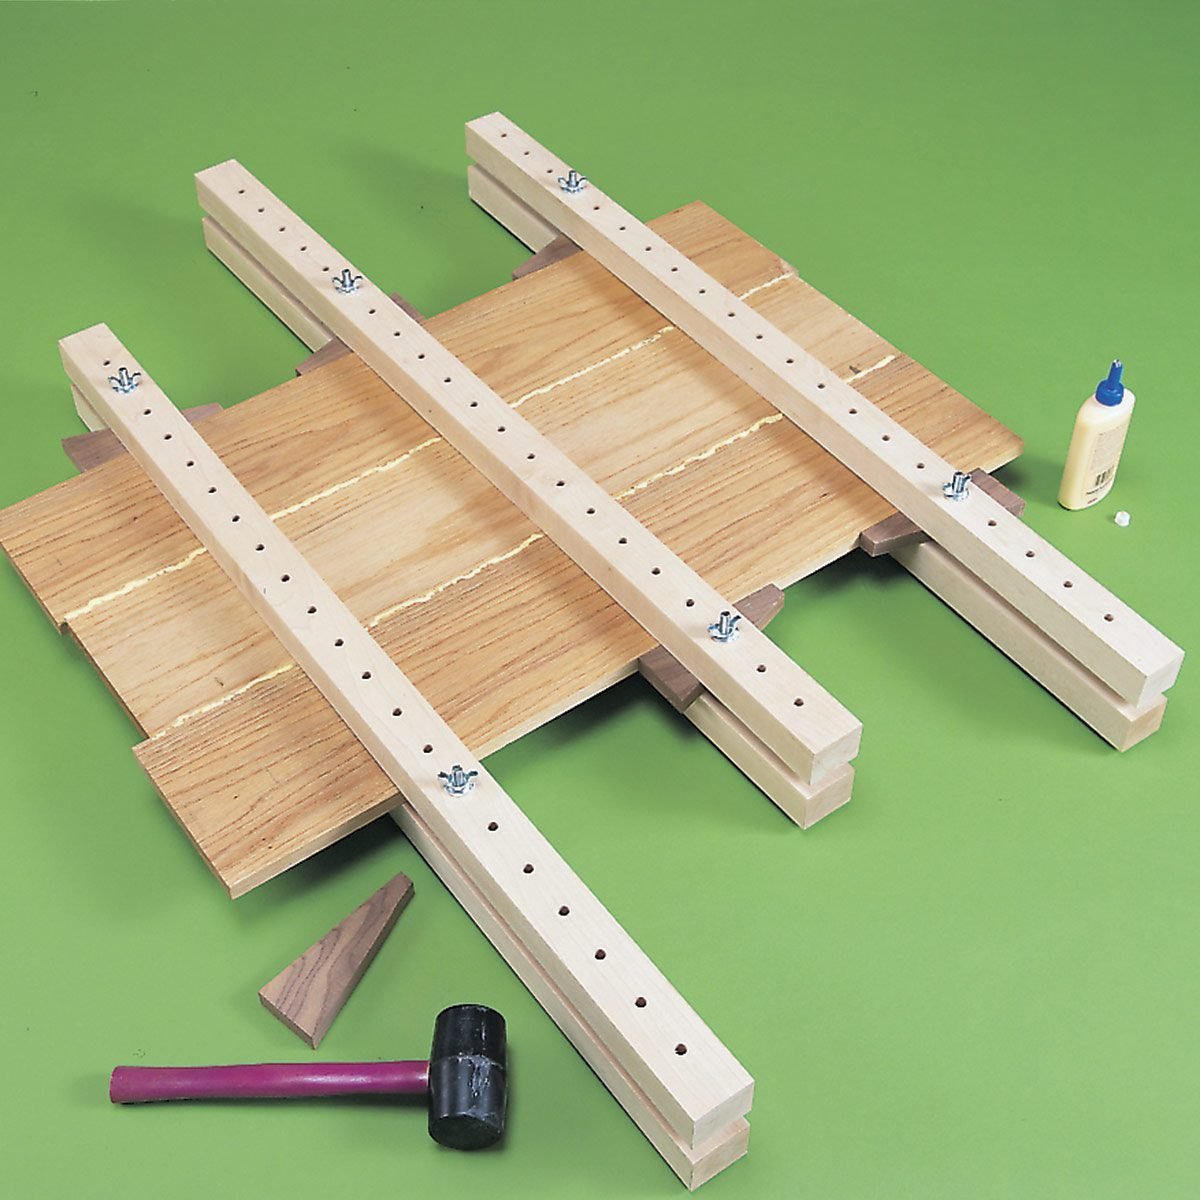 Shop-Made Edge-Gluing Clamps â€